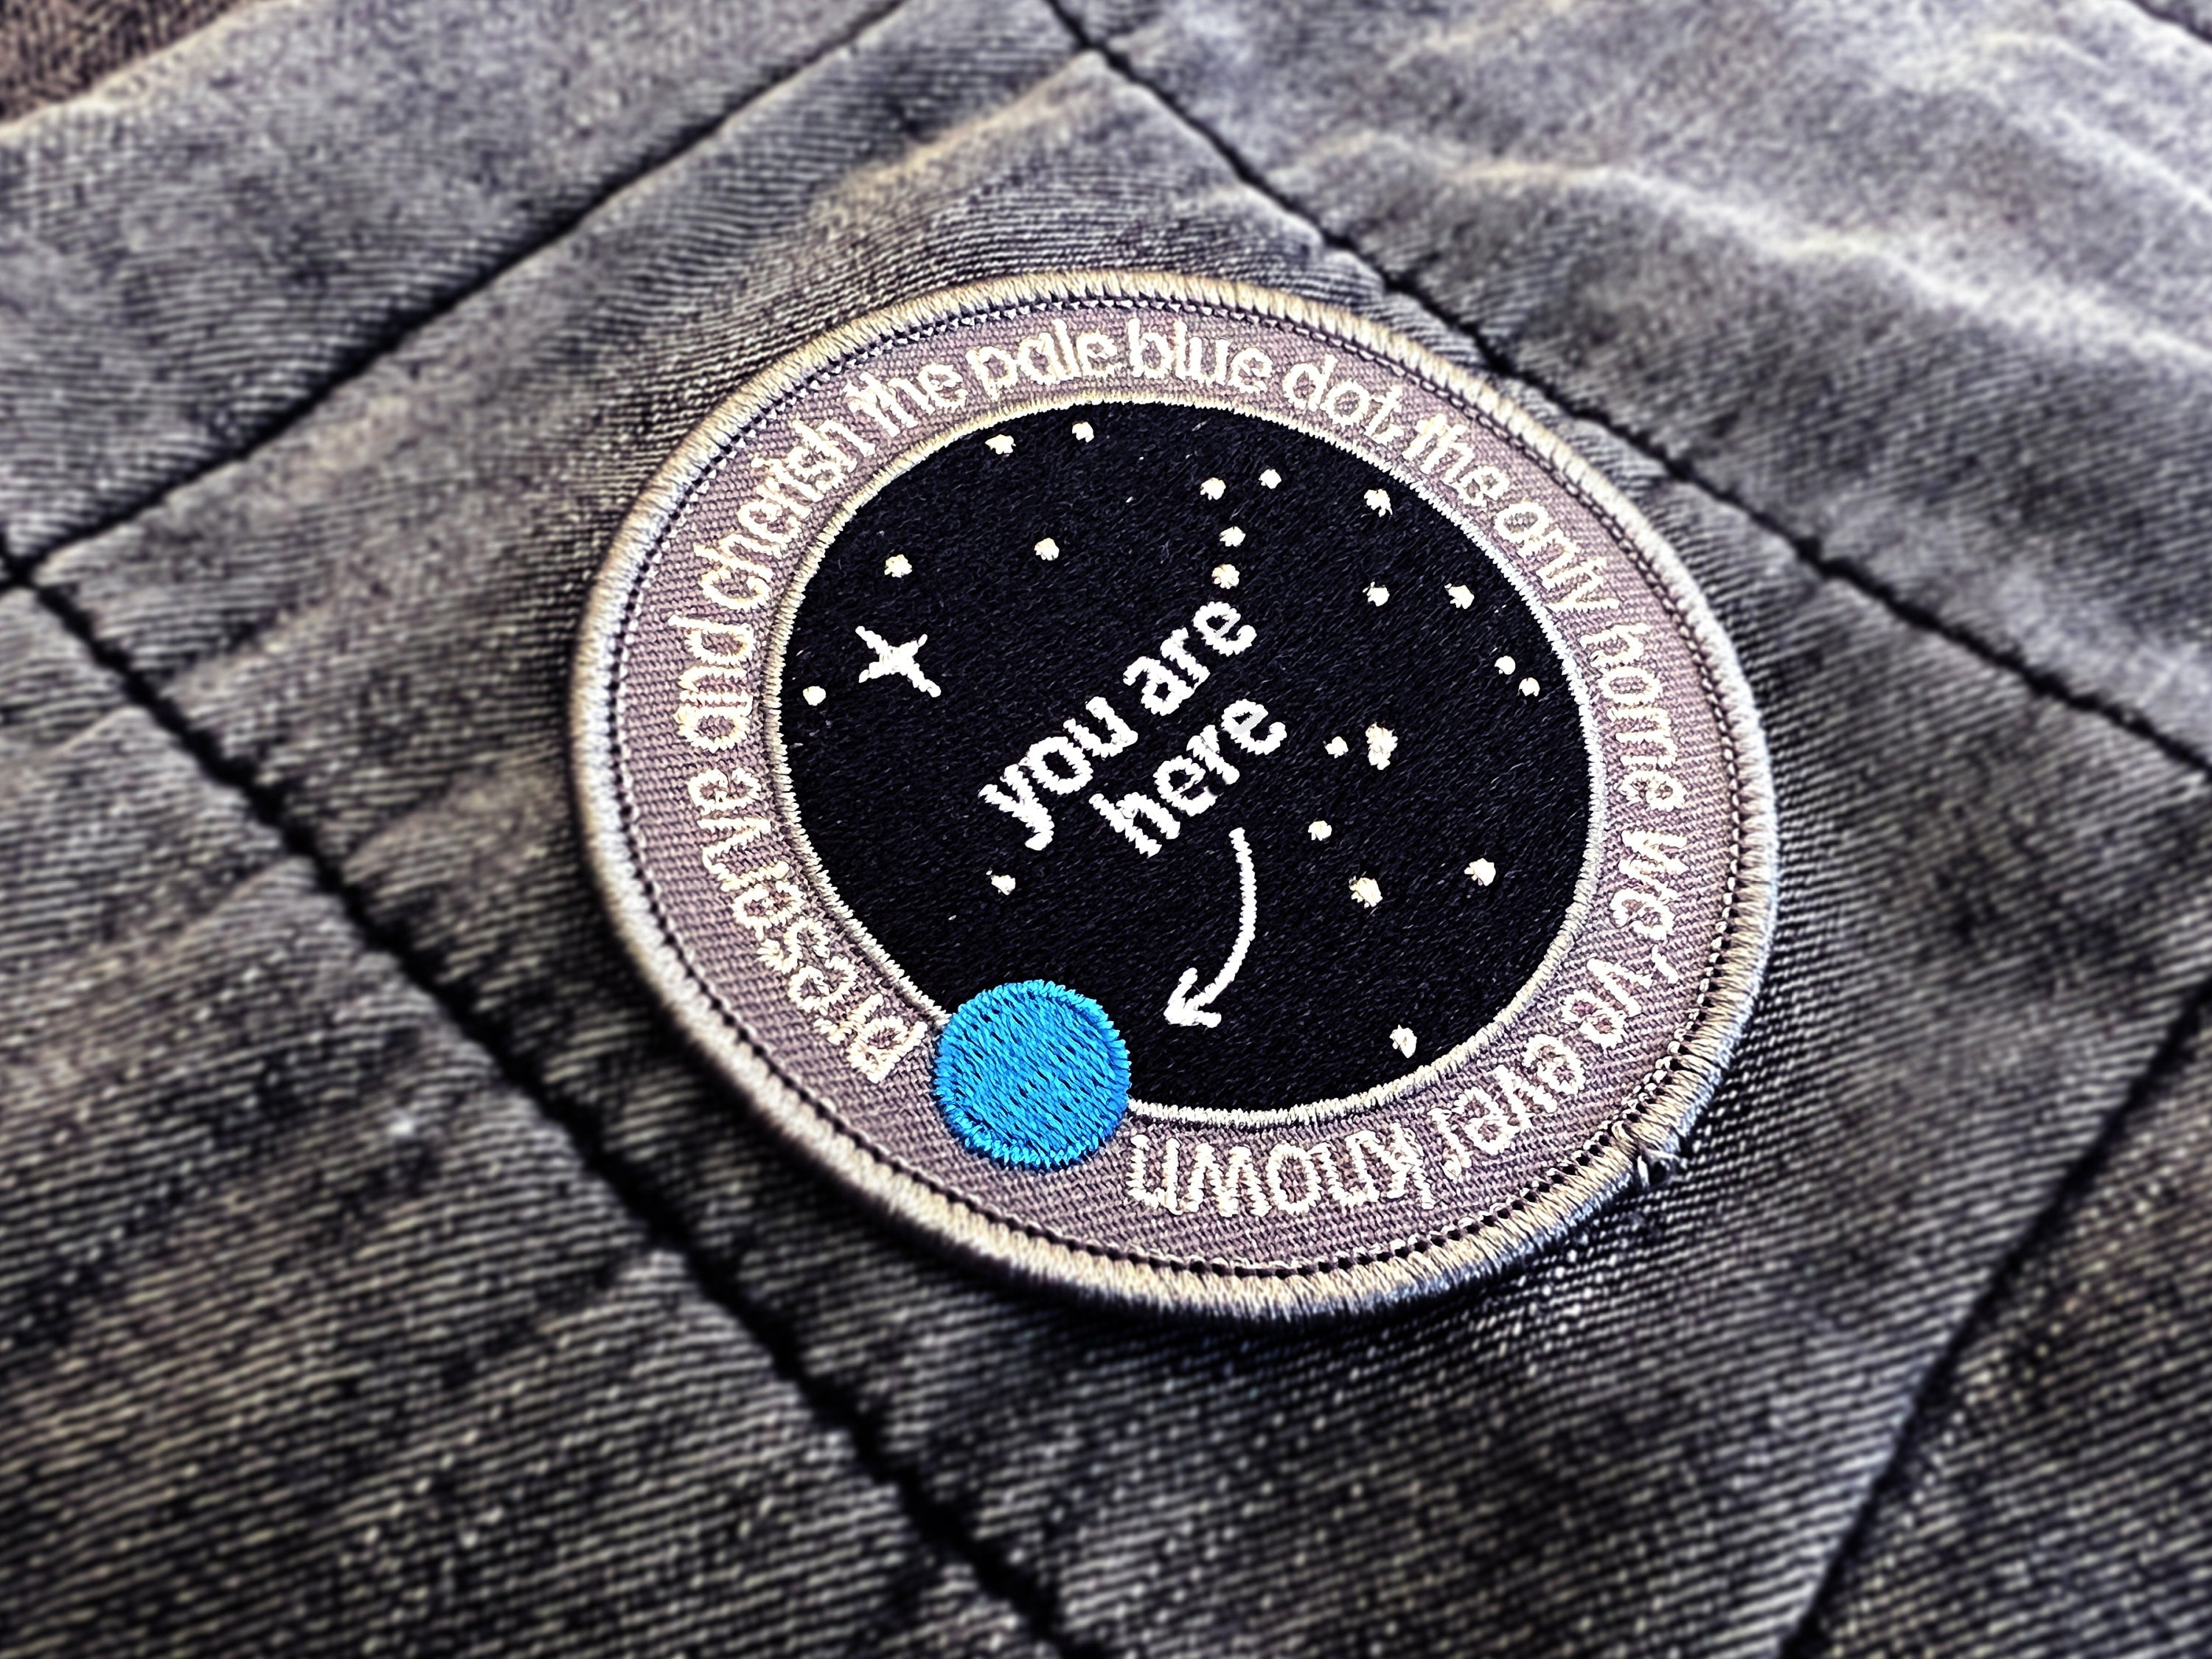 Pale Blue Dot Patch - - Cosmos Expedition Patch - Space Mission Jacket Patch